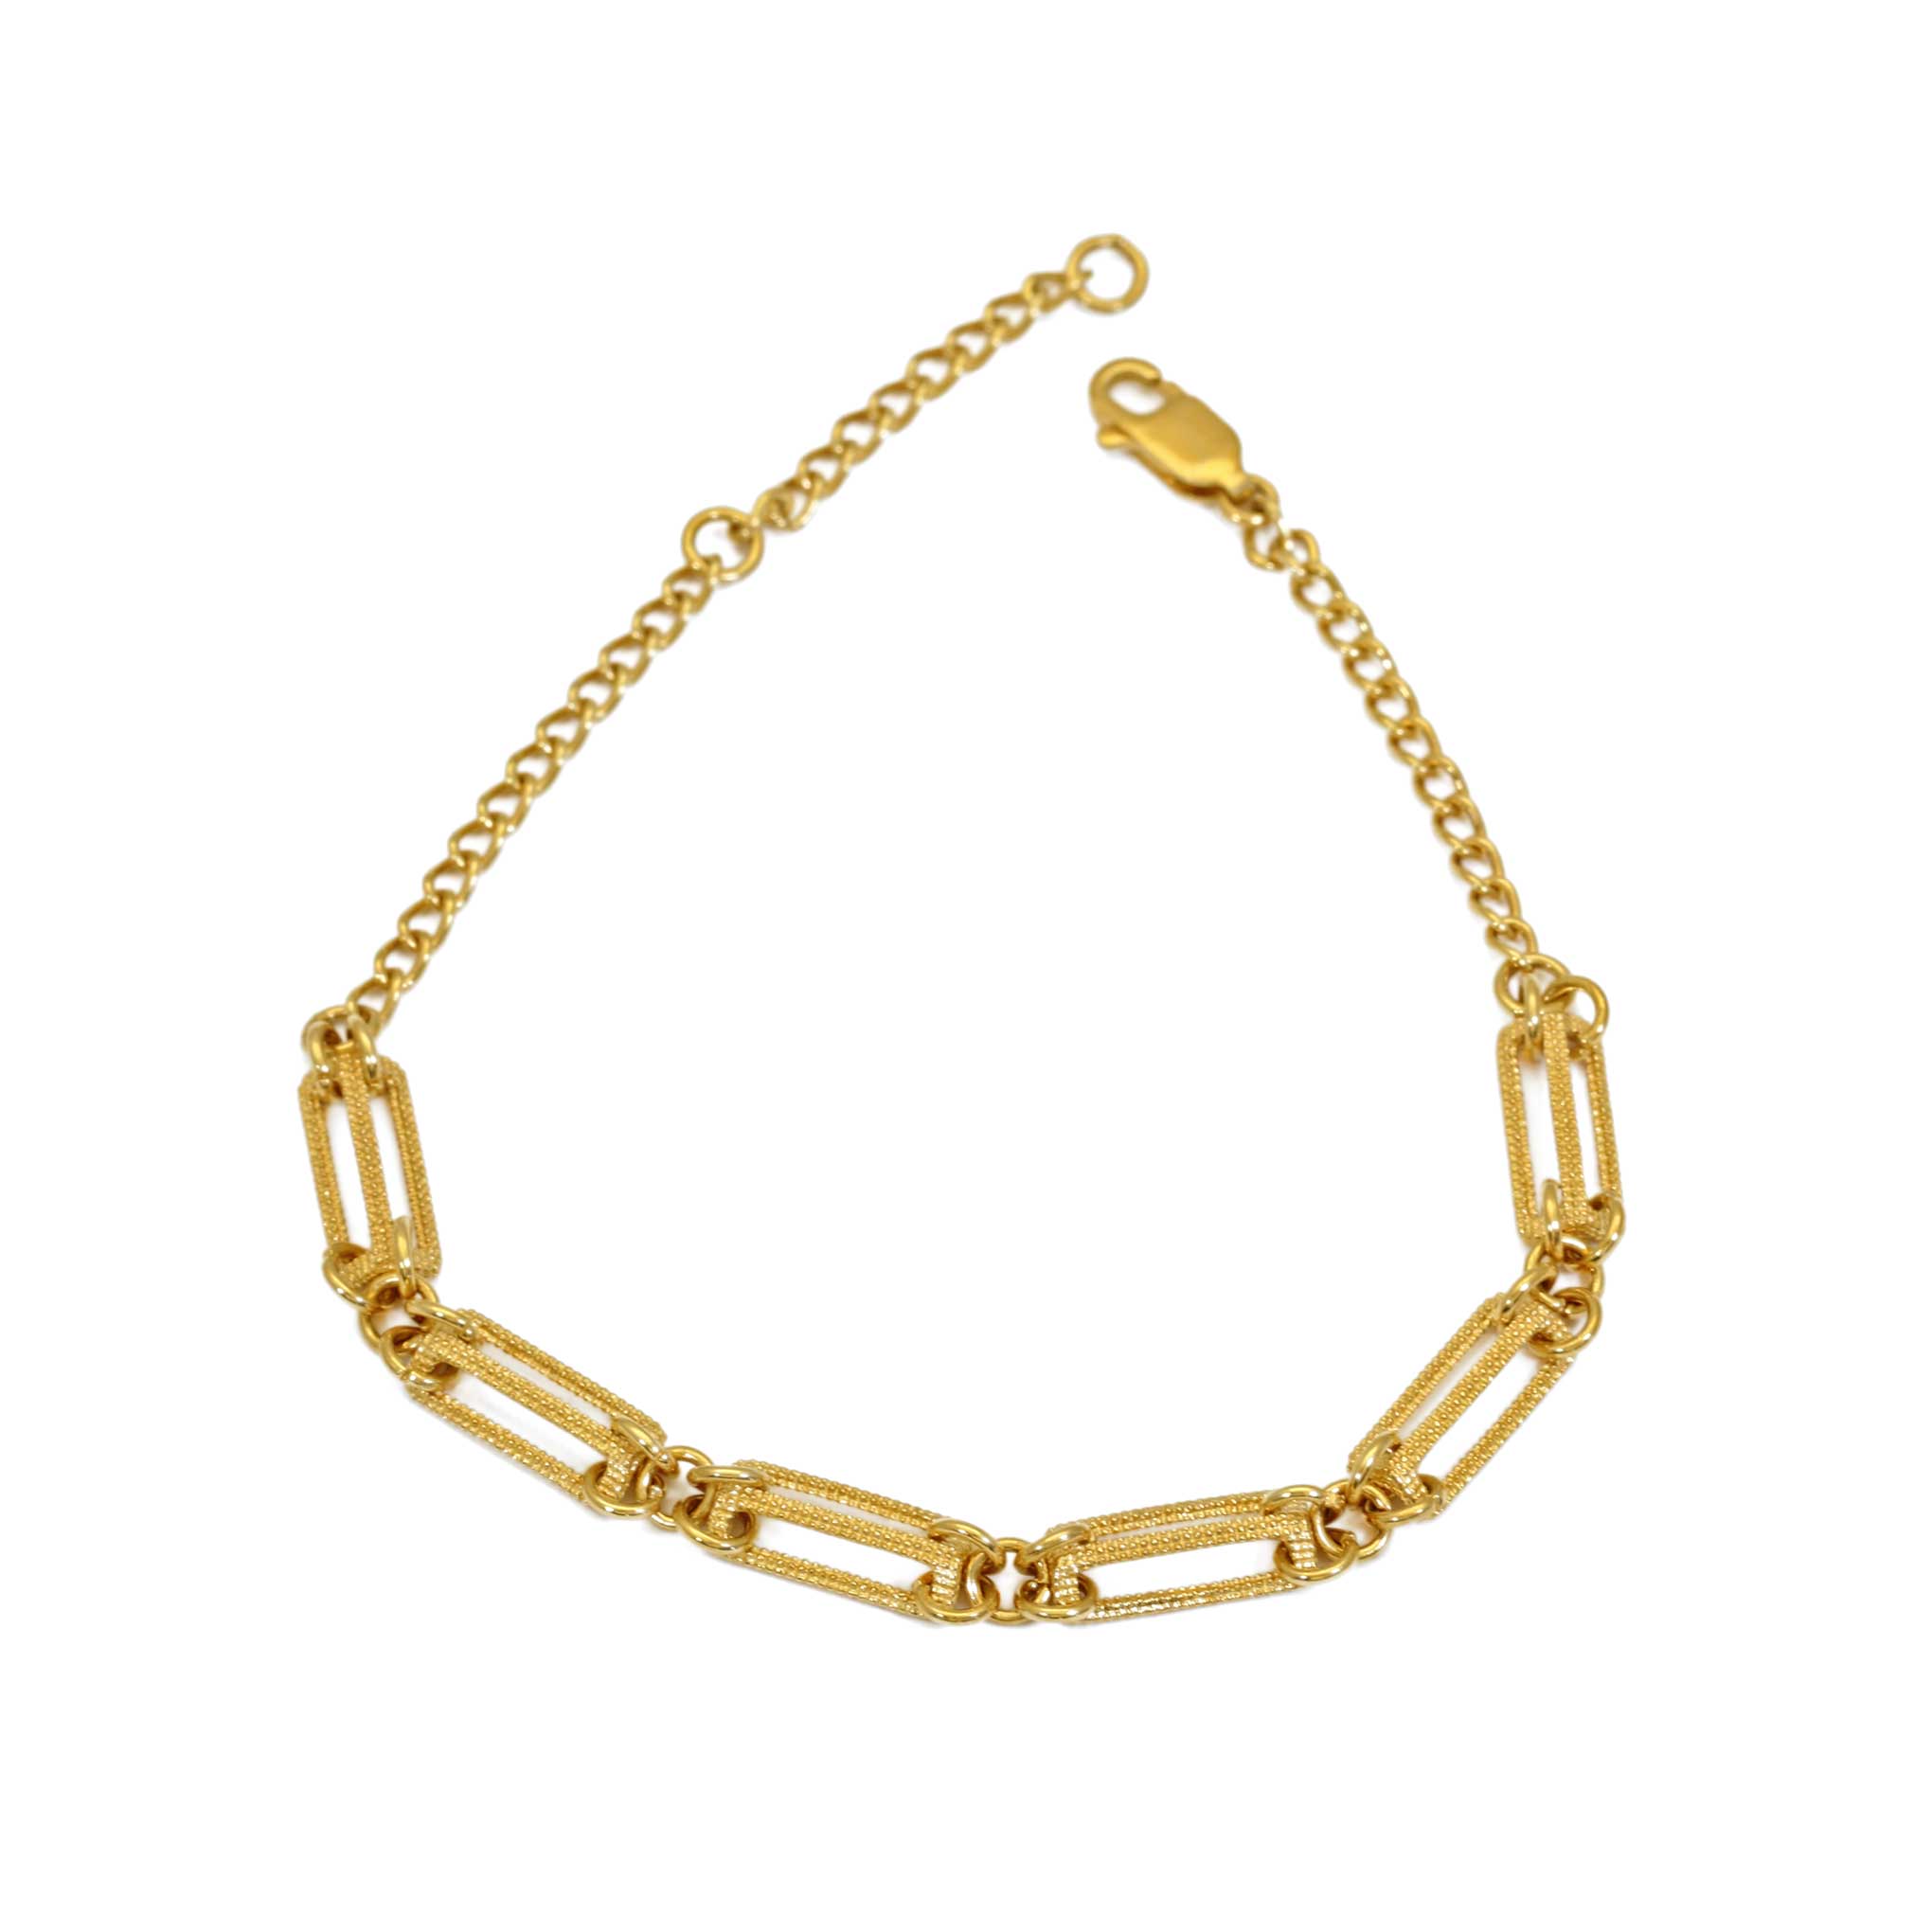 Gold link bracelet with 6 sections